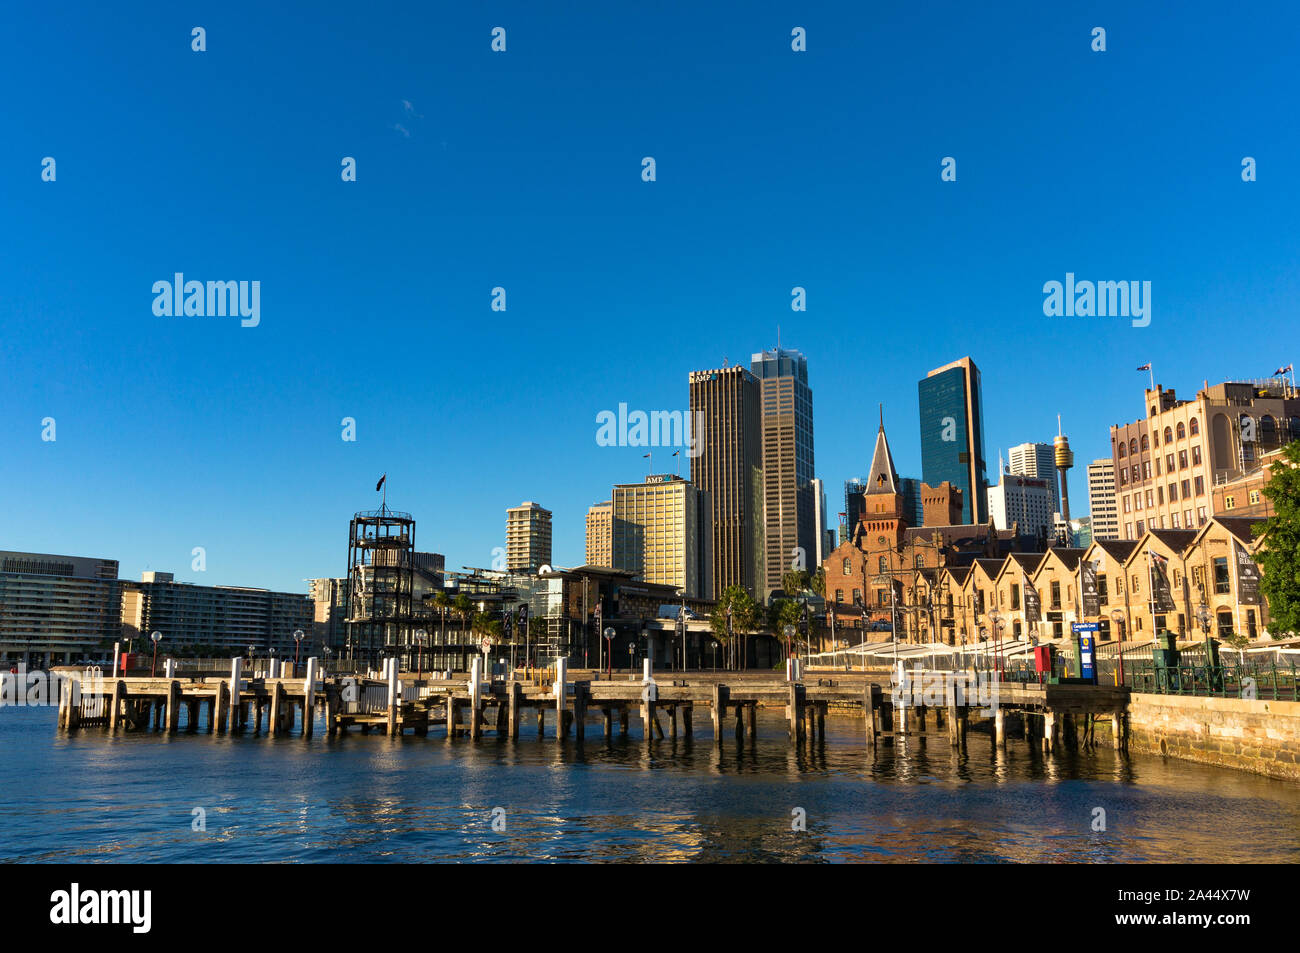 Sydney, Australia - Jul 23, 2016: Campbells Cove Jetty and Sydney Central Business District skyline in The Rocks precinct, which has State heritage si Stock Photo